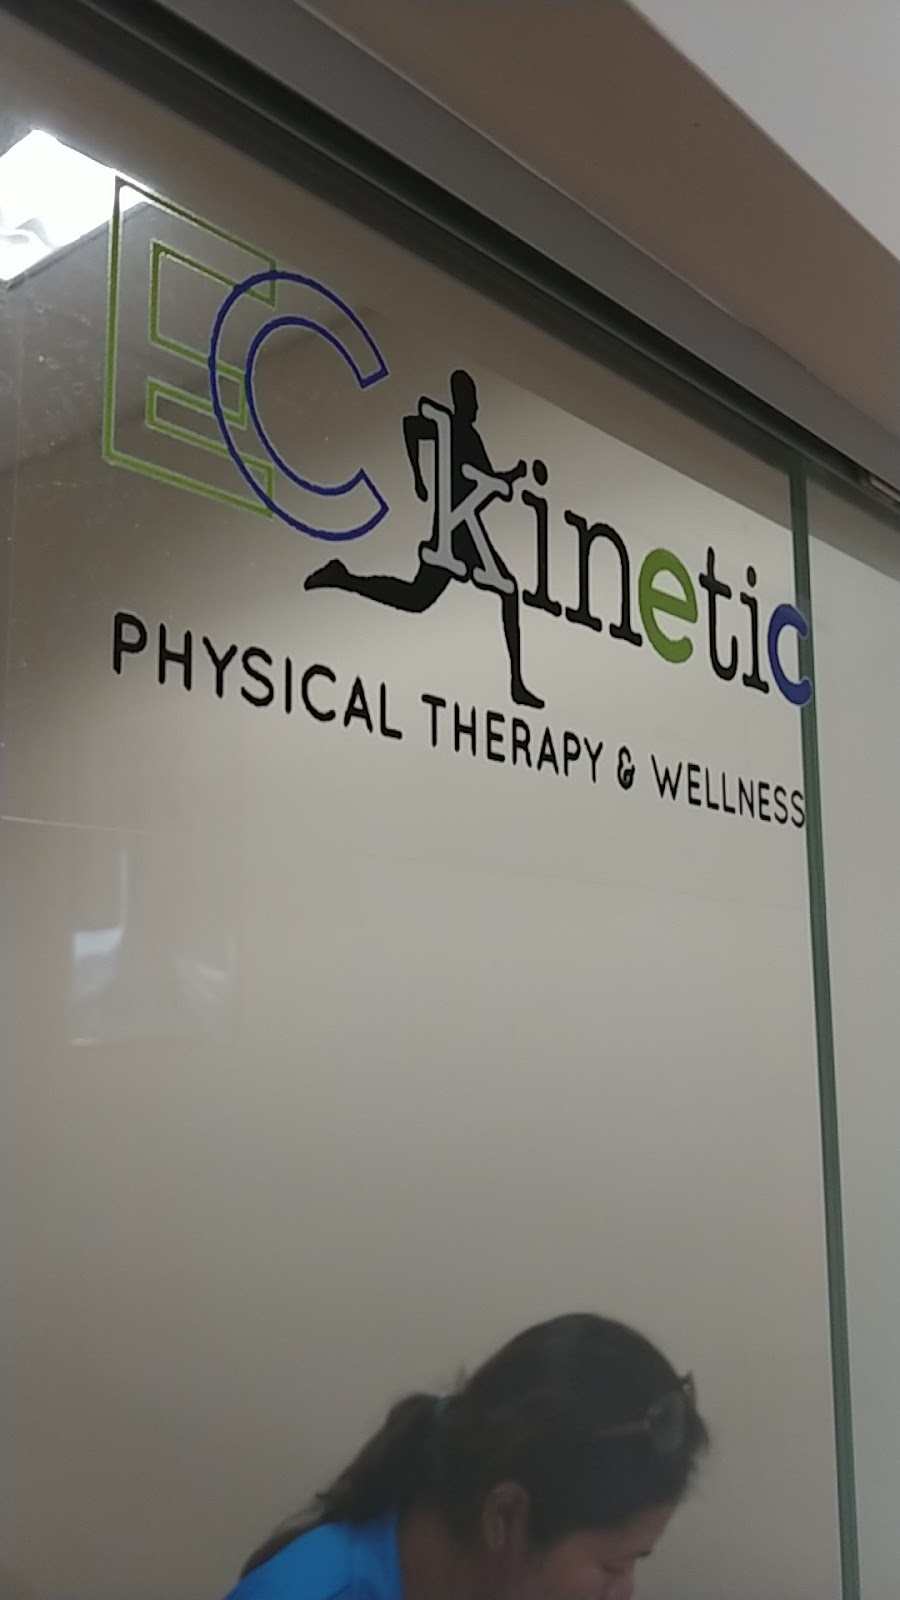 EC Kinetic Physical Therapy & Wellness | Caldwell Medical Plaza, 526 Bloomfield Ave Suite 102, Caldwell, NJ 07006 | Phone: (973) 794-3080